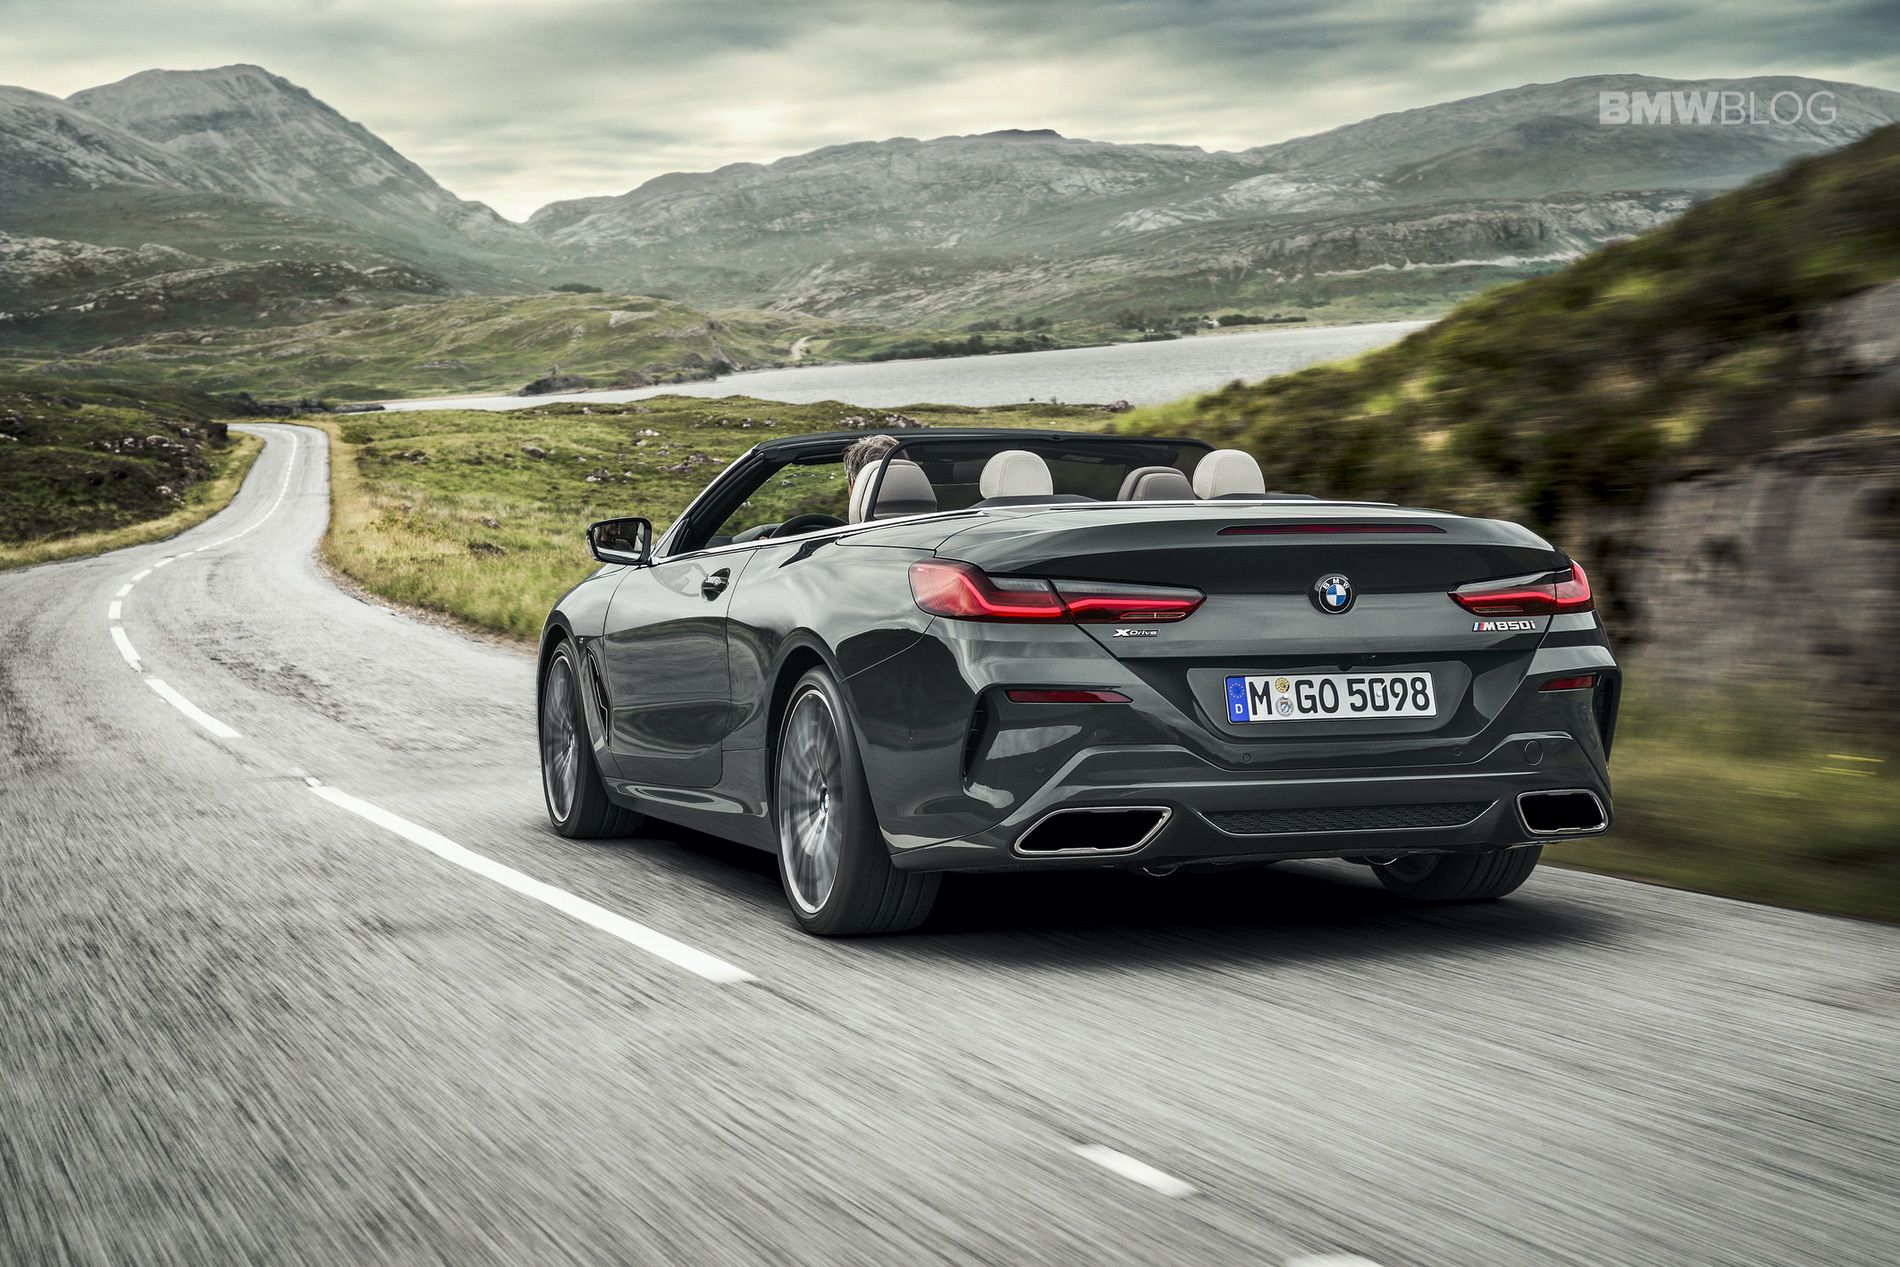 VIDEO GALLERY: 2019 BMW 8 Series Convertible